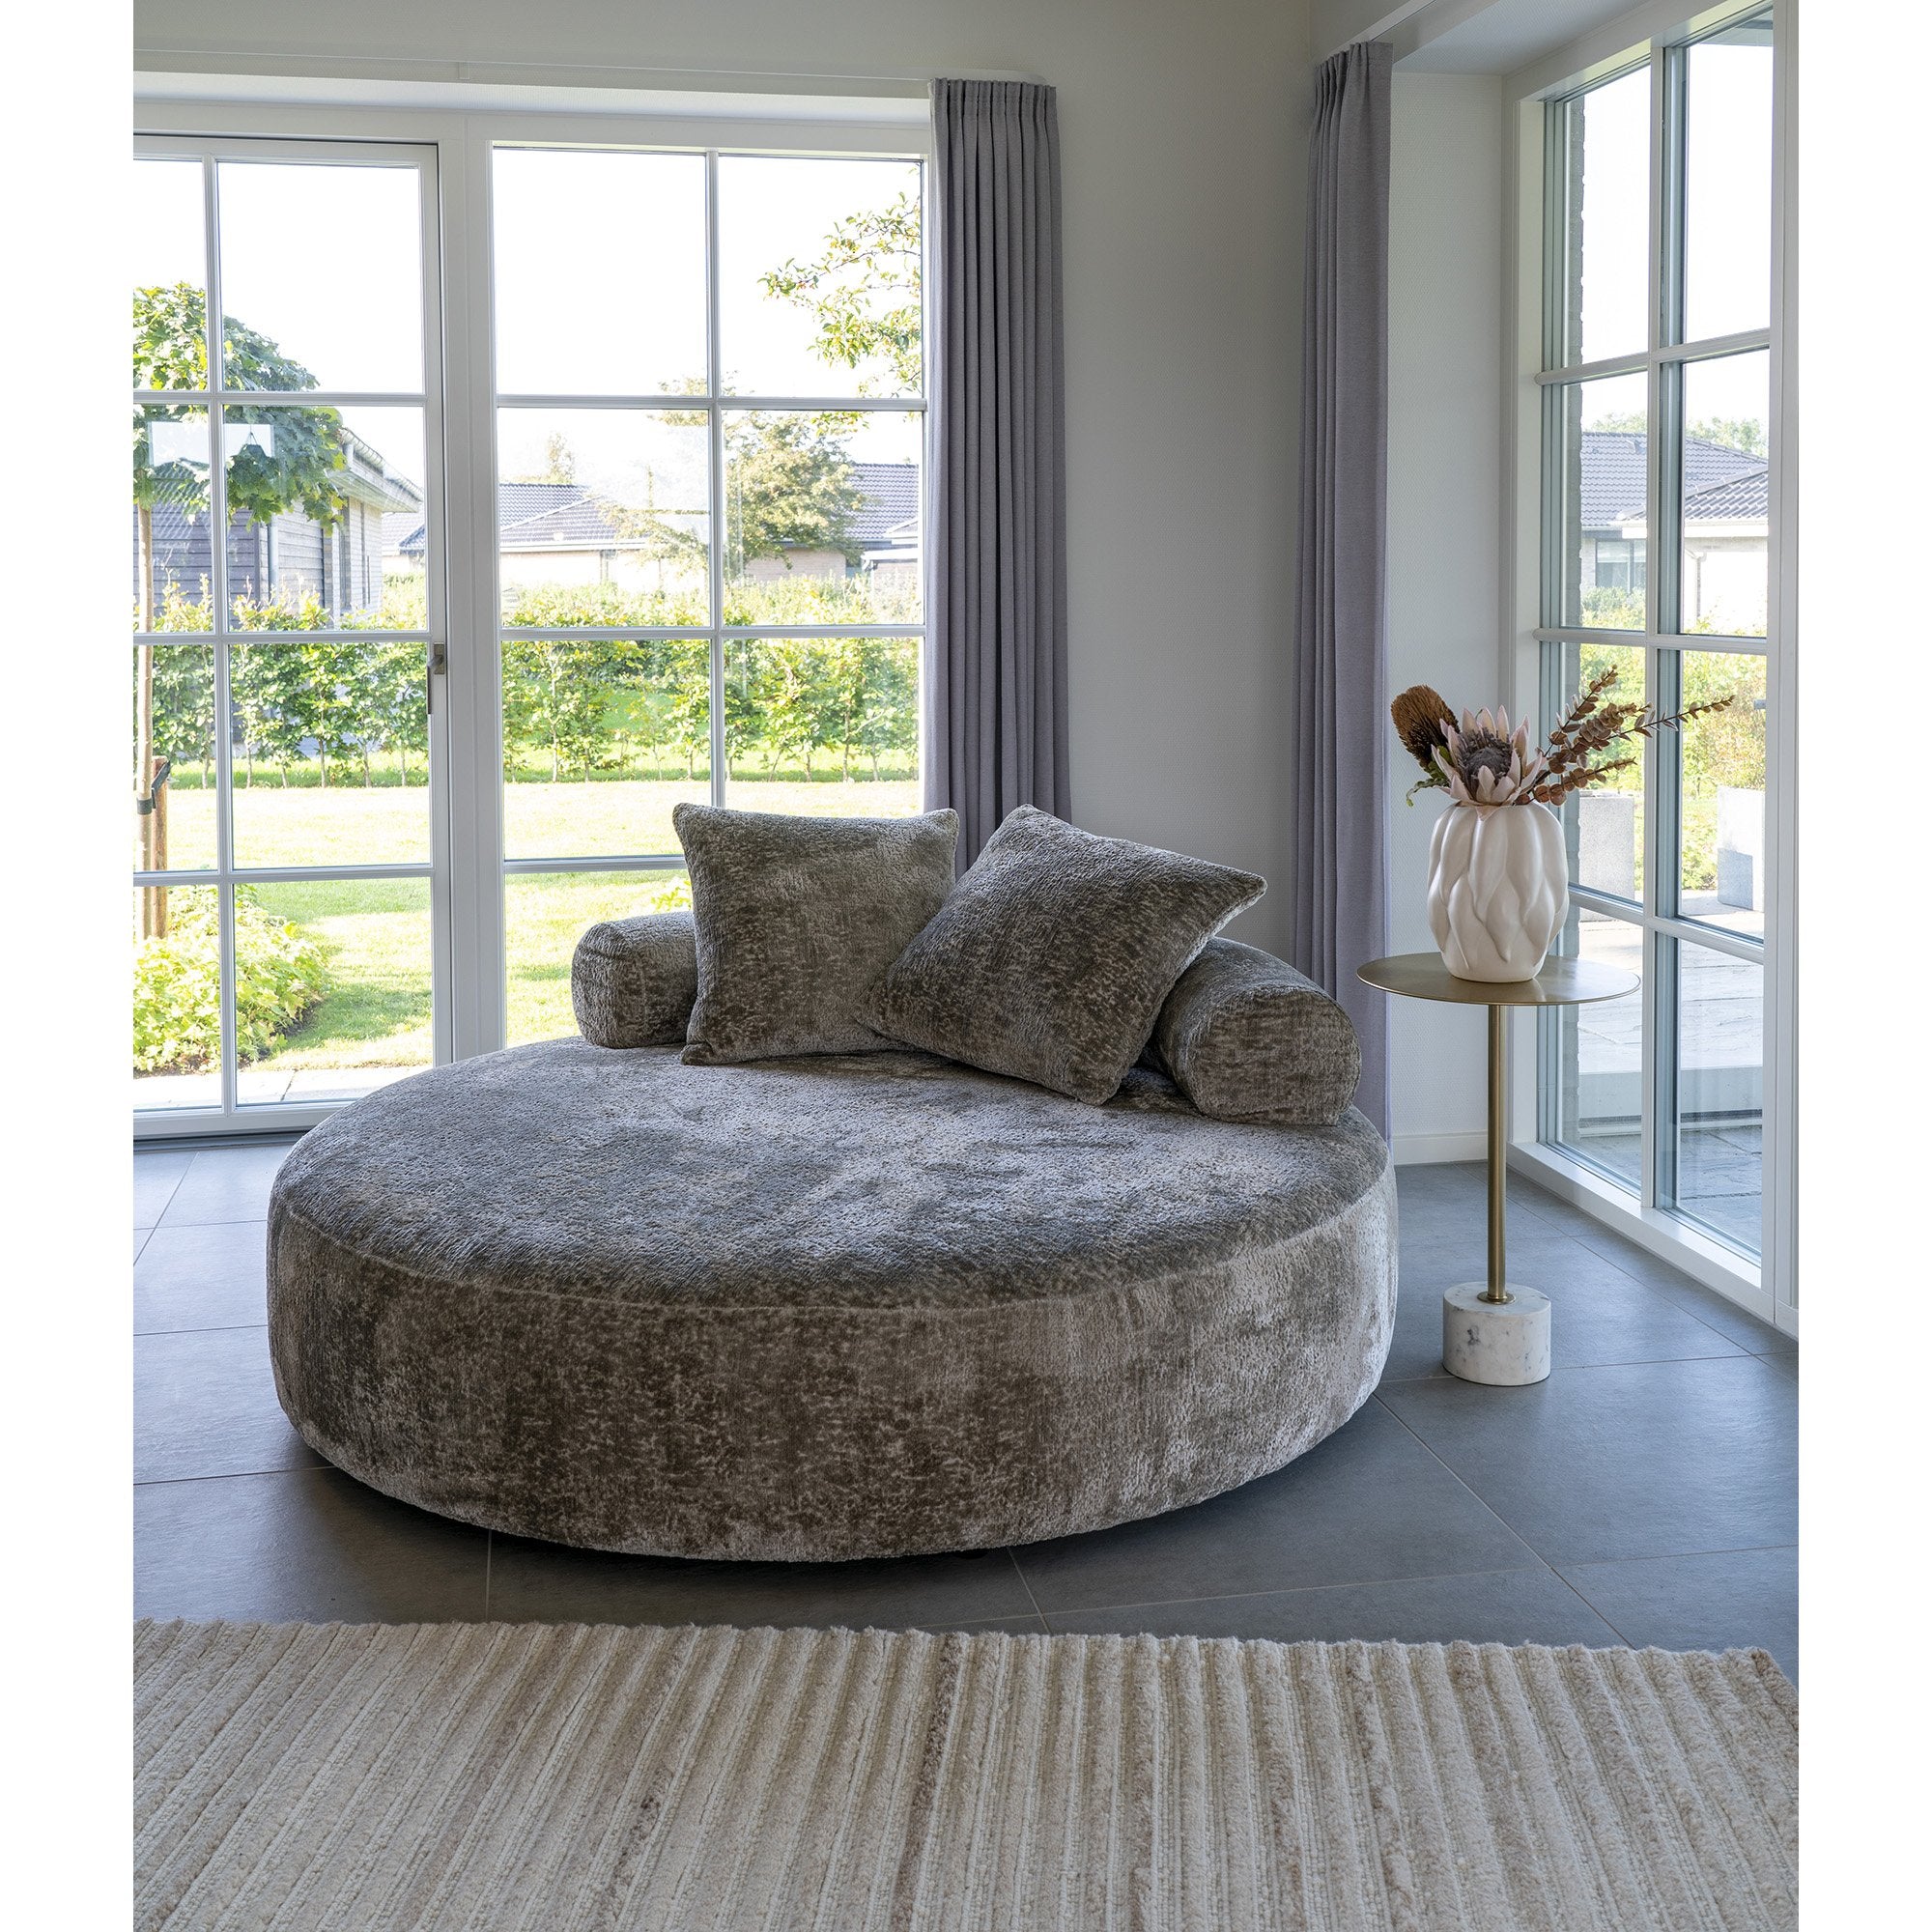 Cairo Daybed - Daybed Med 2 Puder I Chenille, Rund, Natur, Hn1251 ⎮ 5713917025664 ⎮ 5029050 